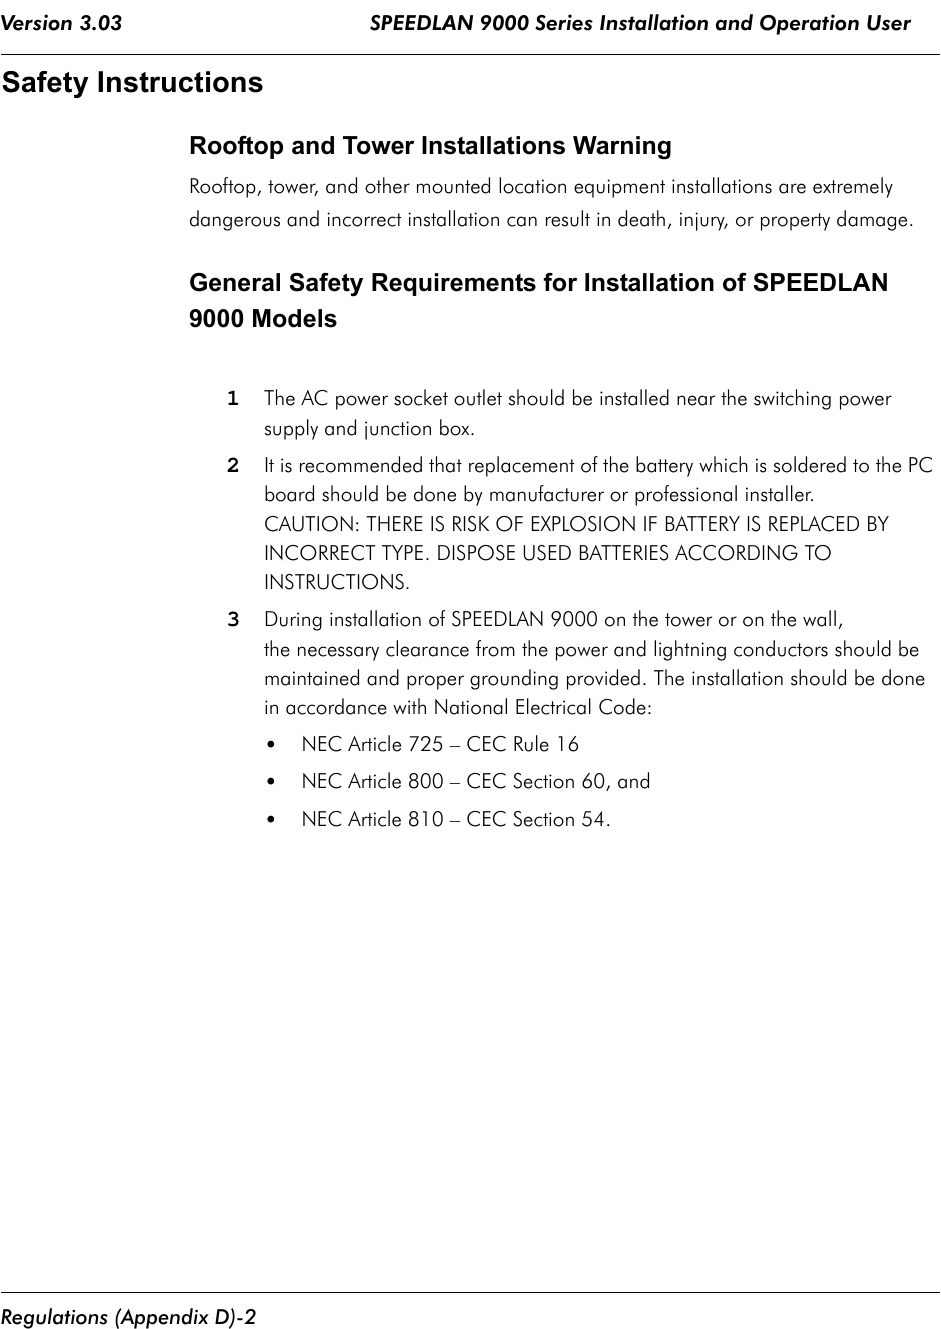 Version 3.03                                        SPEEDLAN 9000 Series Installation and Operation User  Regulations (Appendix D)-2Safety InstructionsRooftop and Tower Installations Warning Rooftop, tower, and other mounted location equipment installations are extremely dangerous and incorrect installation can result in death, injury, or property damage.General Safety Requirements for Installation of SPEEDLAN 9000 Models1The AC power socket outlet should be installed near the switching power supply and junction box.2It is recommended that replacement of the battery which is soldered to the PC board should be done by manufacturer or professional installer. CAUTION: THERE IS RISK OF EXPLOSION IF BATTERY IS REPLACED BY INCORRECT TYPE. DISPOSE USED BATTERIES ACCORDING TO INSTRUCTIONS.3During installation of SPEEDLAN 9000 on the tower or on the wall, the necessary clearance from the power and lightning conductors should be maintained and proper grounding provided. The installation should be done in accordance with National Electrical Code:•NEC Article 725 – CEC Rule 16•NEC Article 800 – CEC Section 60, and•NEC Article 810 – CEC Section 54.              